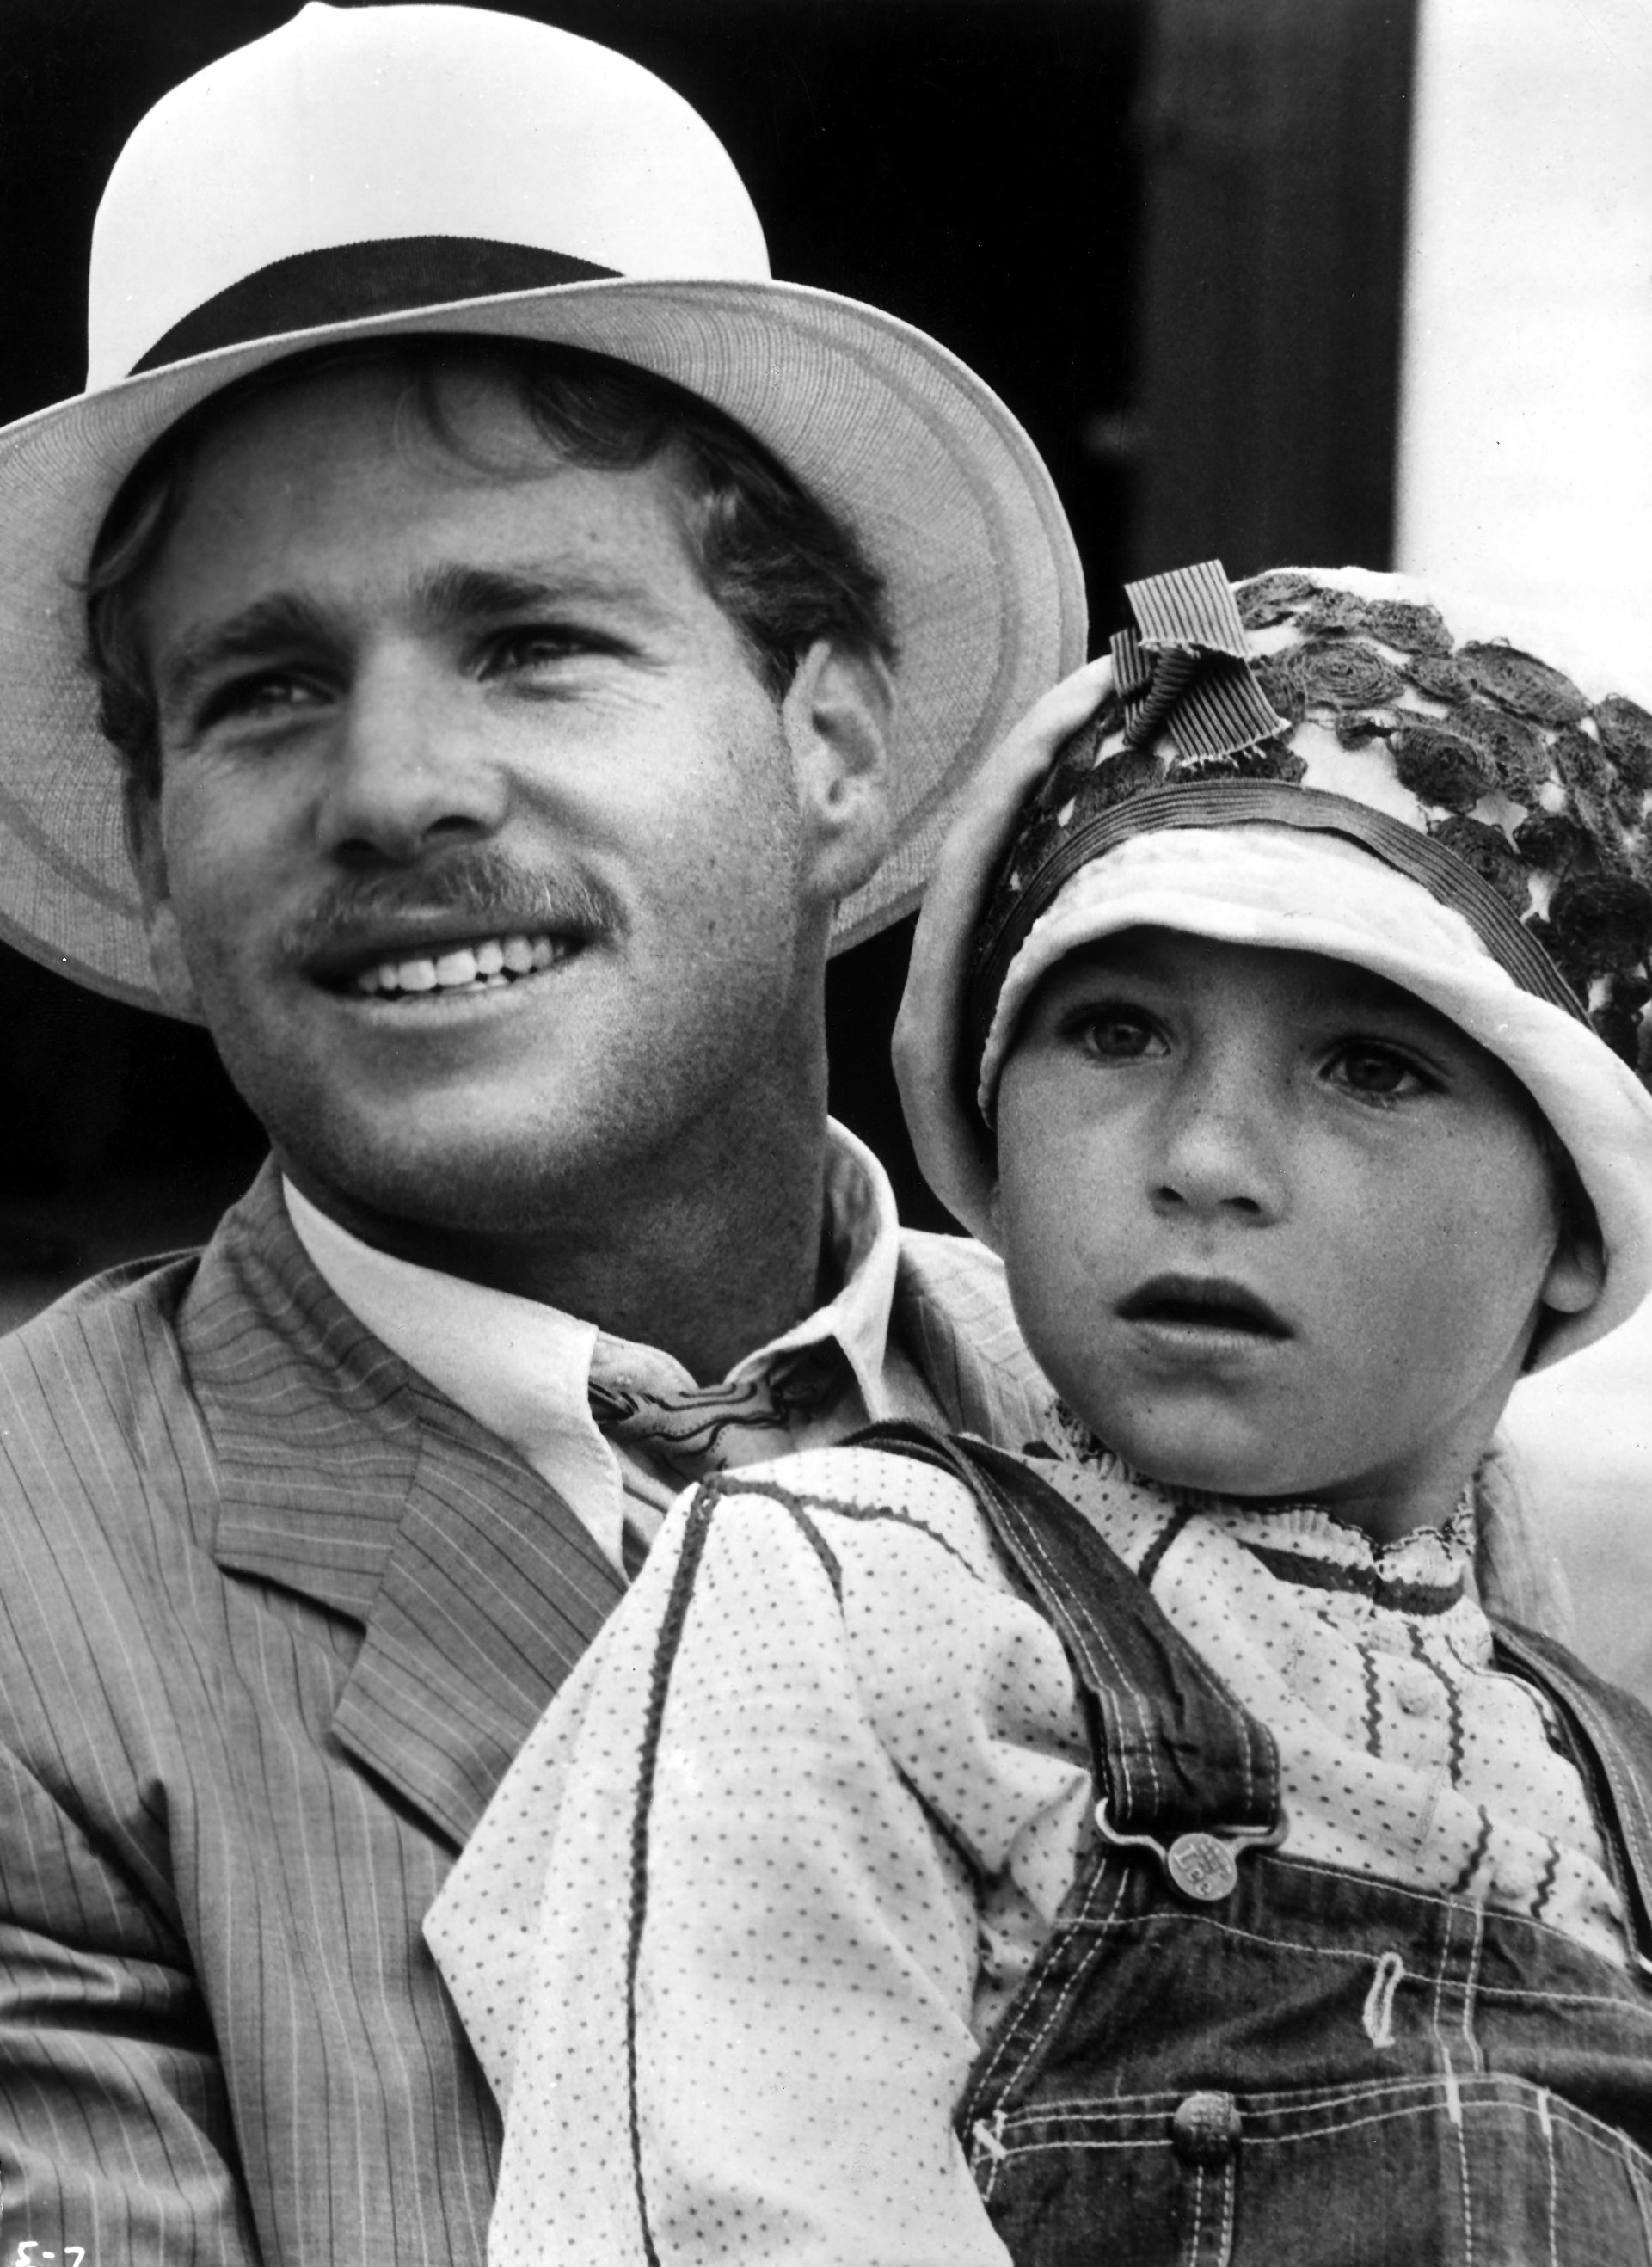 Ryan O'Neal holding Tatum O'Neal in a scene from the film "Paper Moon," 1973 | Source: Getty Images